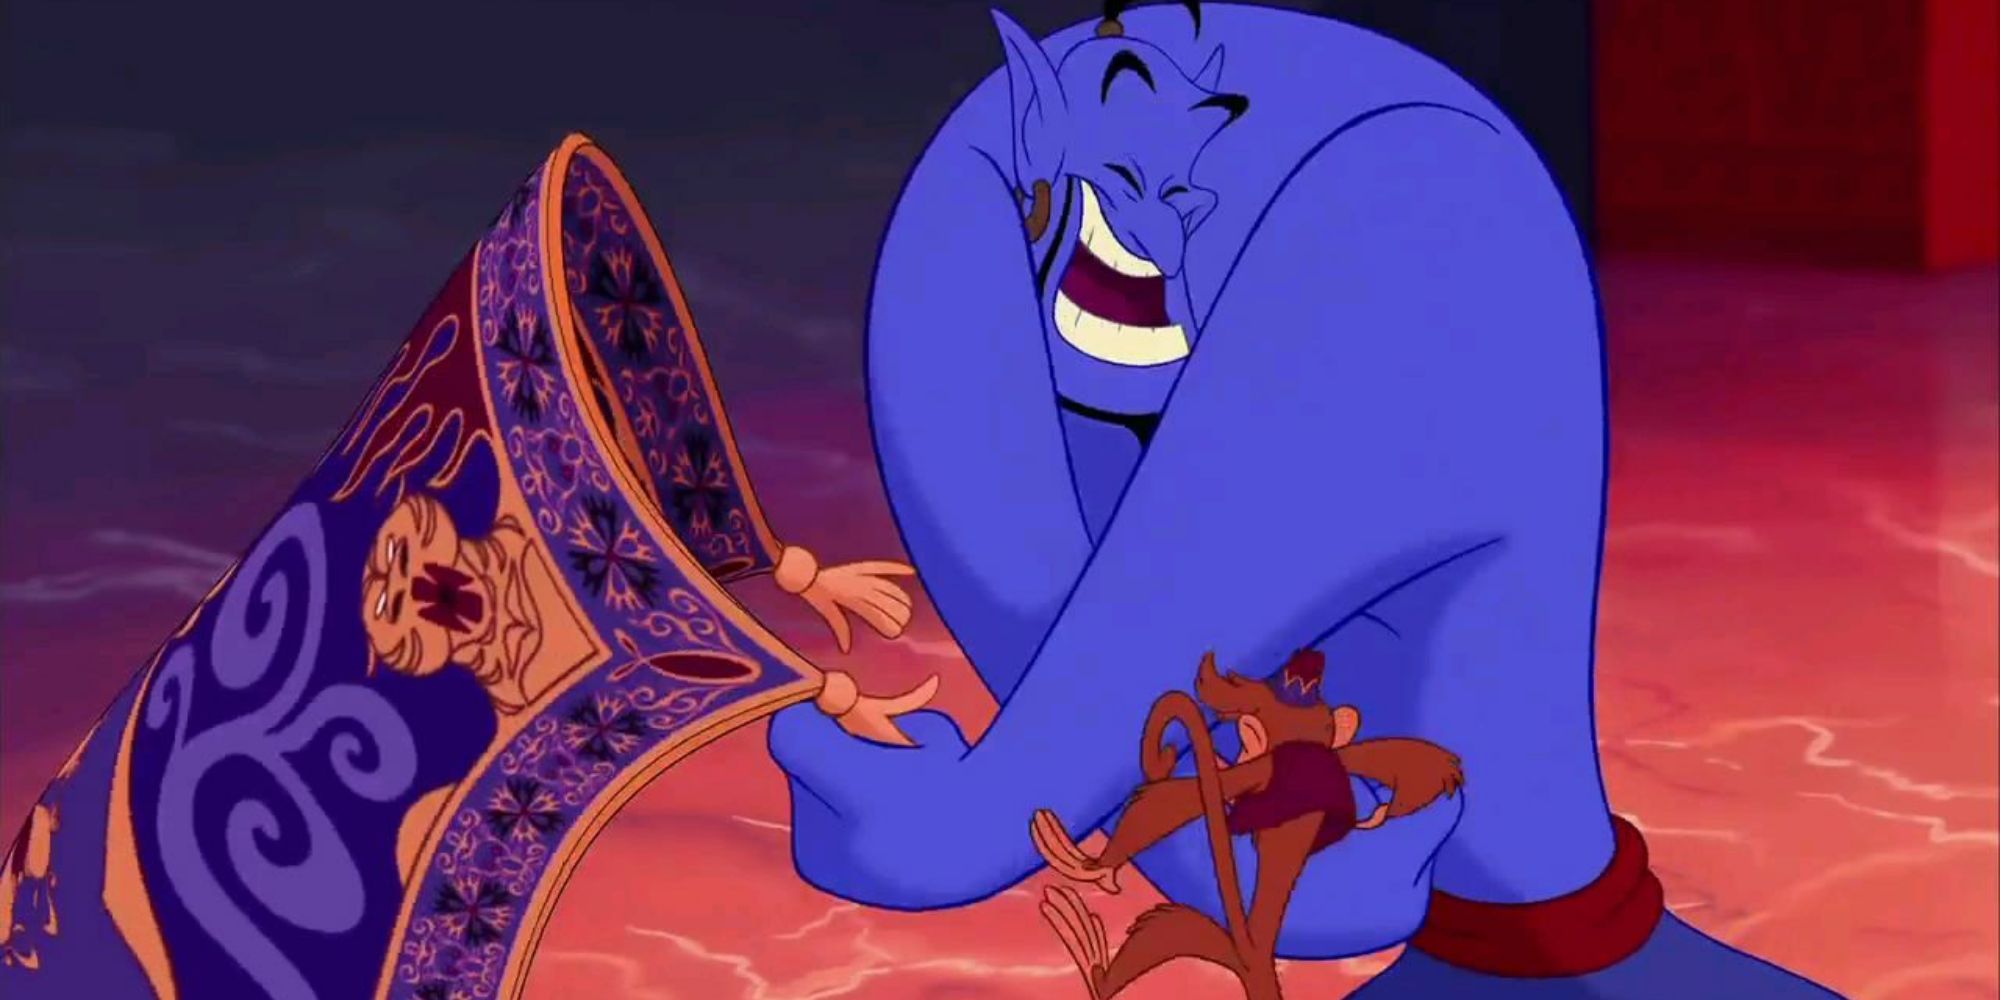 10 Most Unlikely Friendships In Disney Movies Ranked